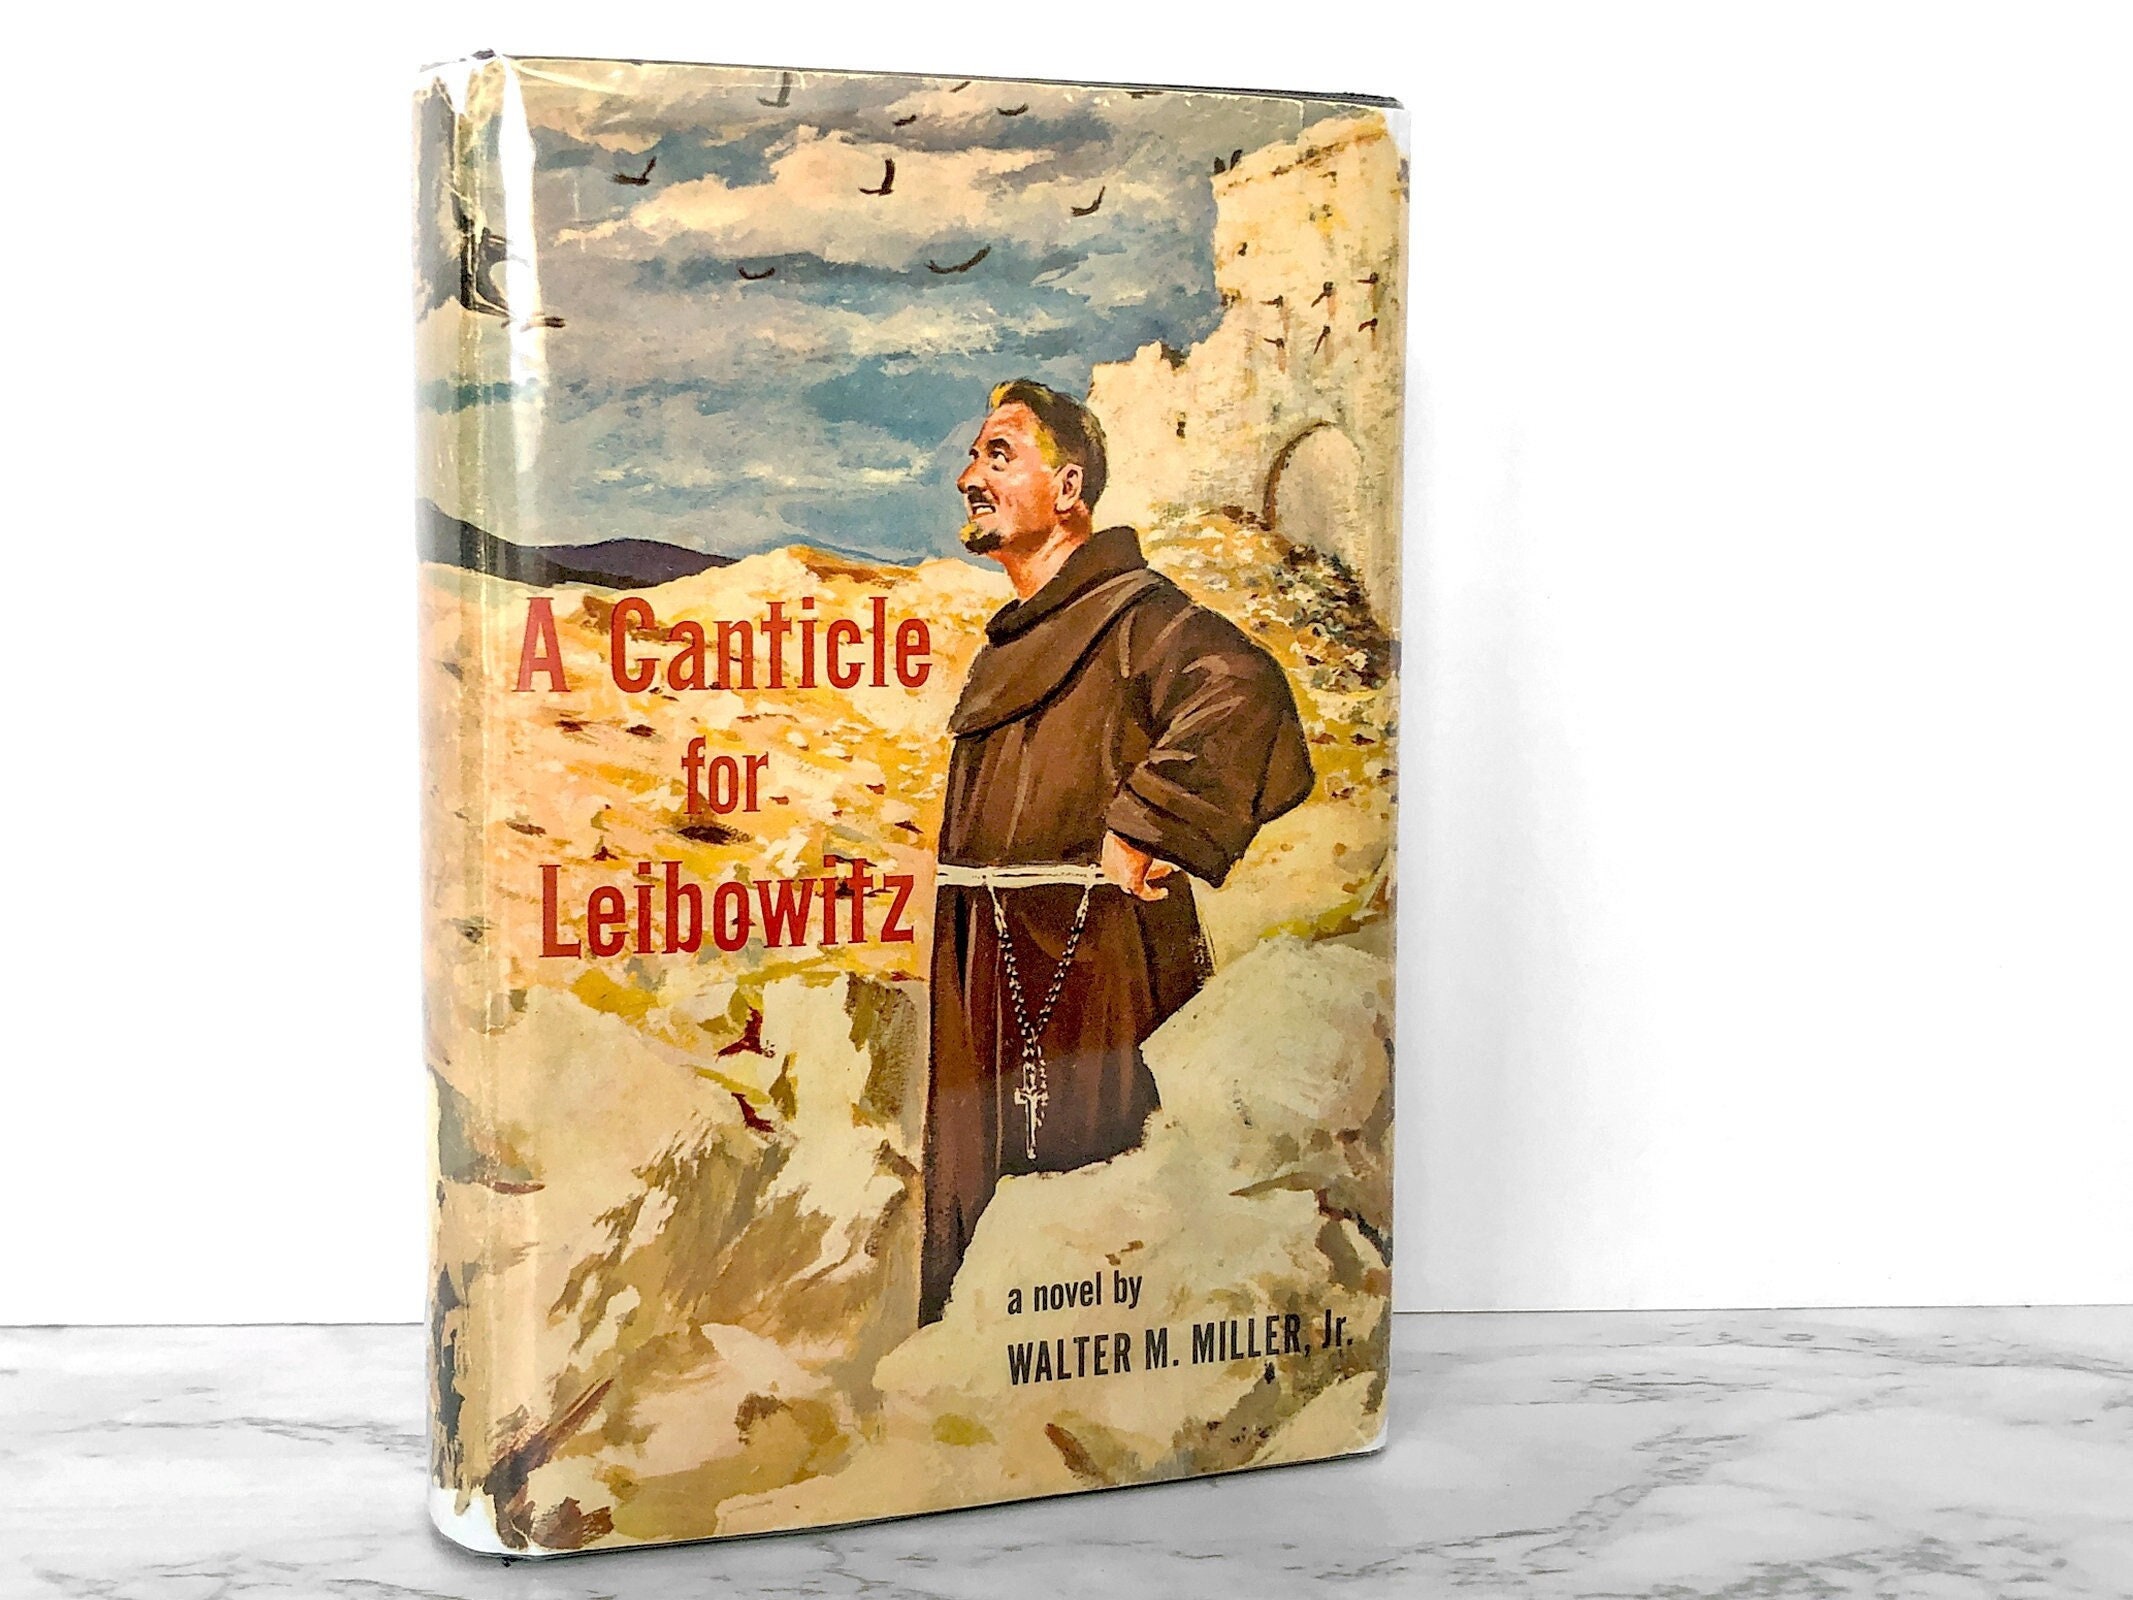 Buy A Canticle for Leibowitz by Walter M. Miller Jr. FIRST Online in India - Etsy science fiction 